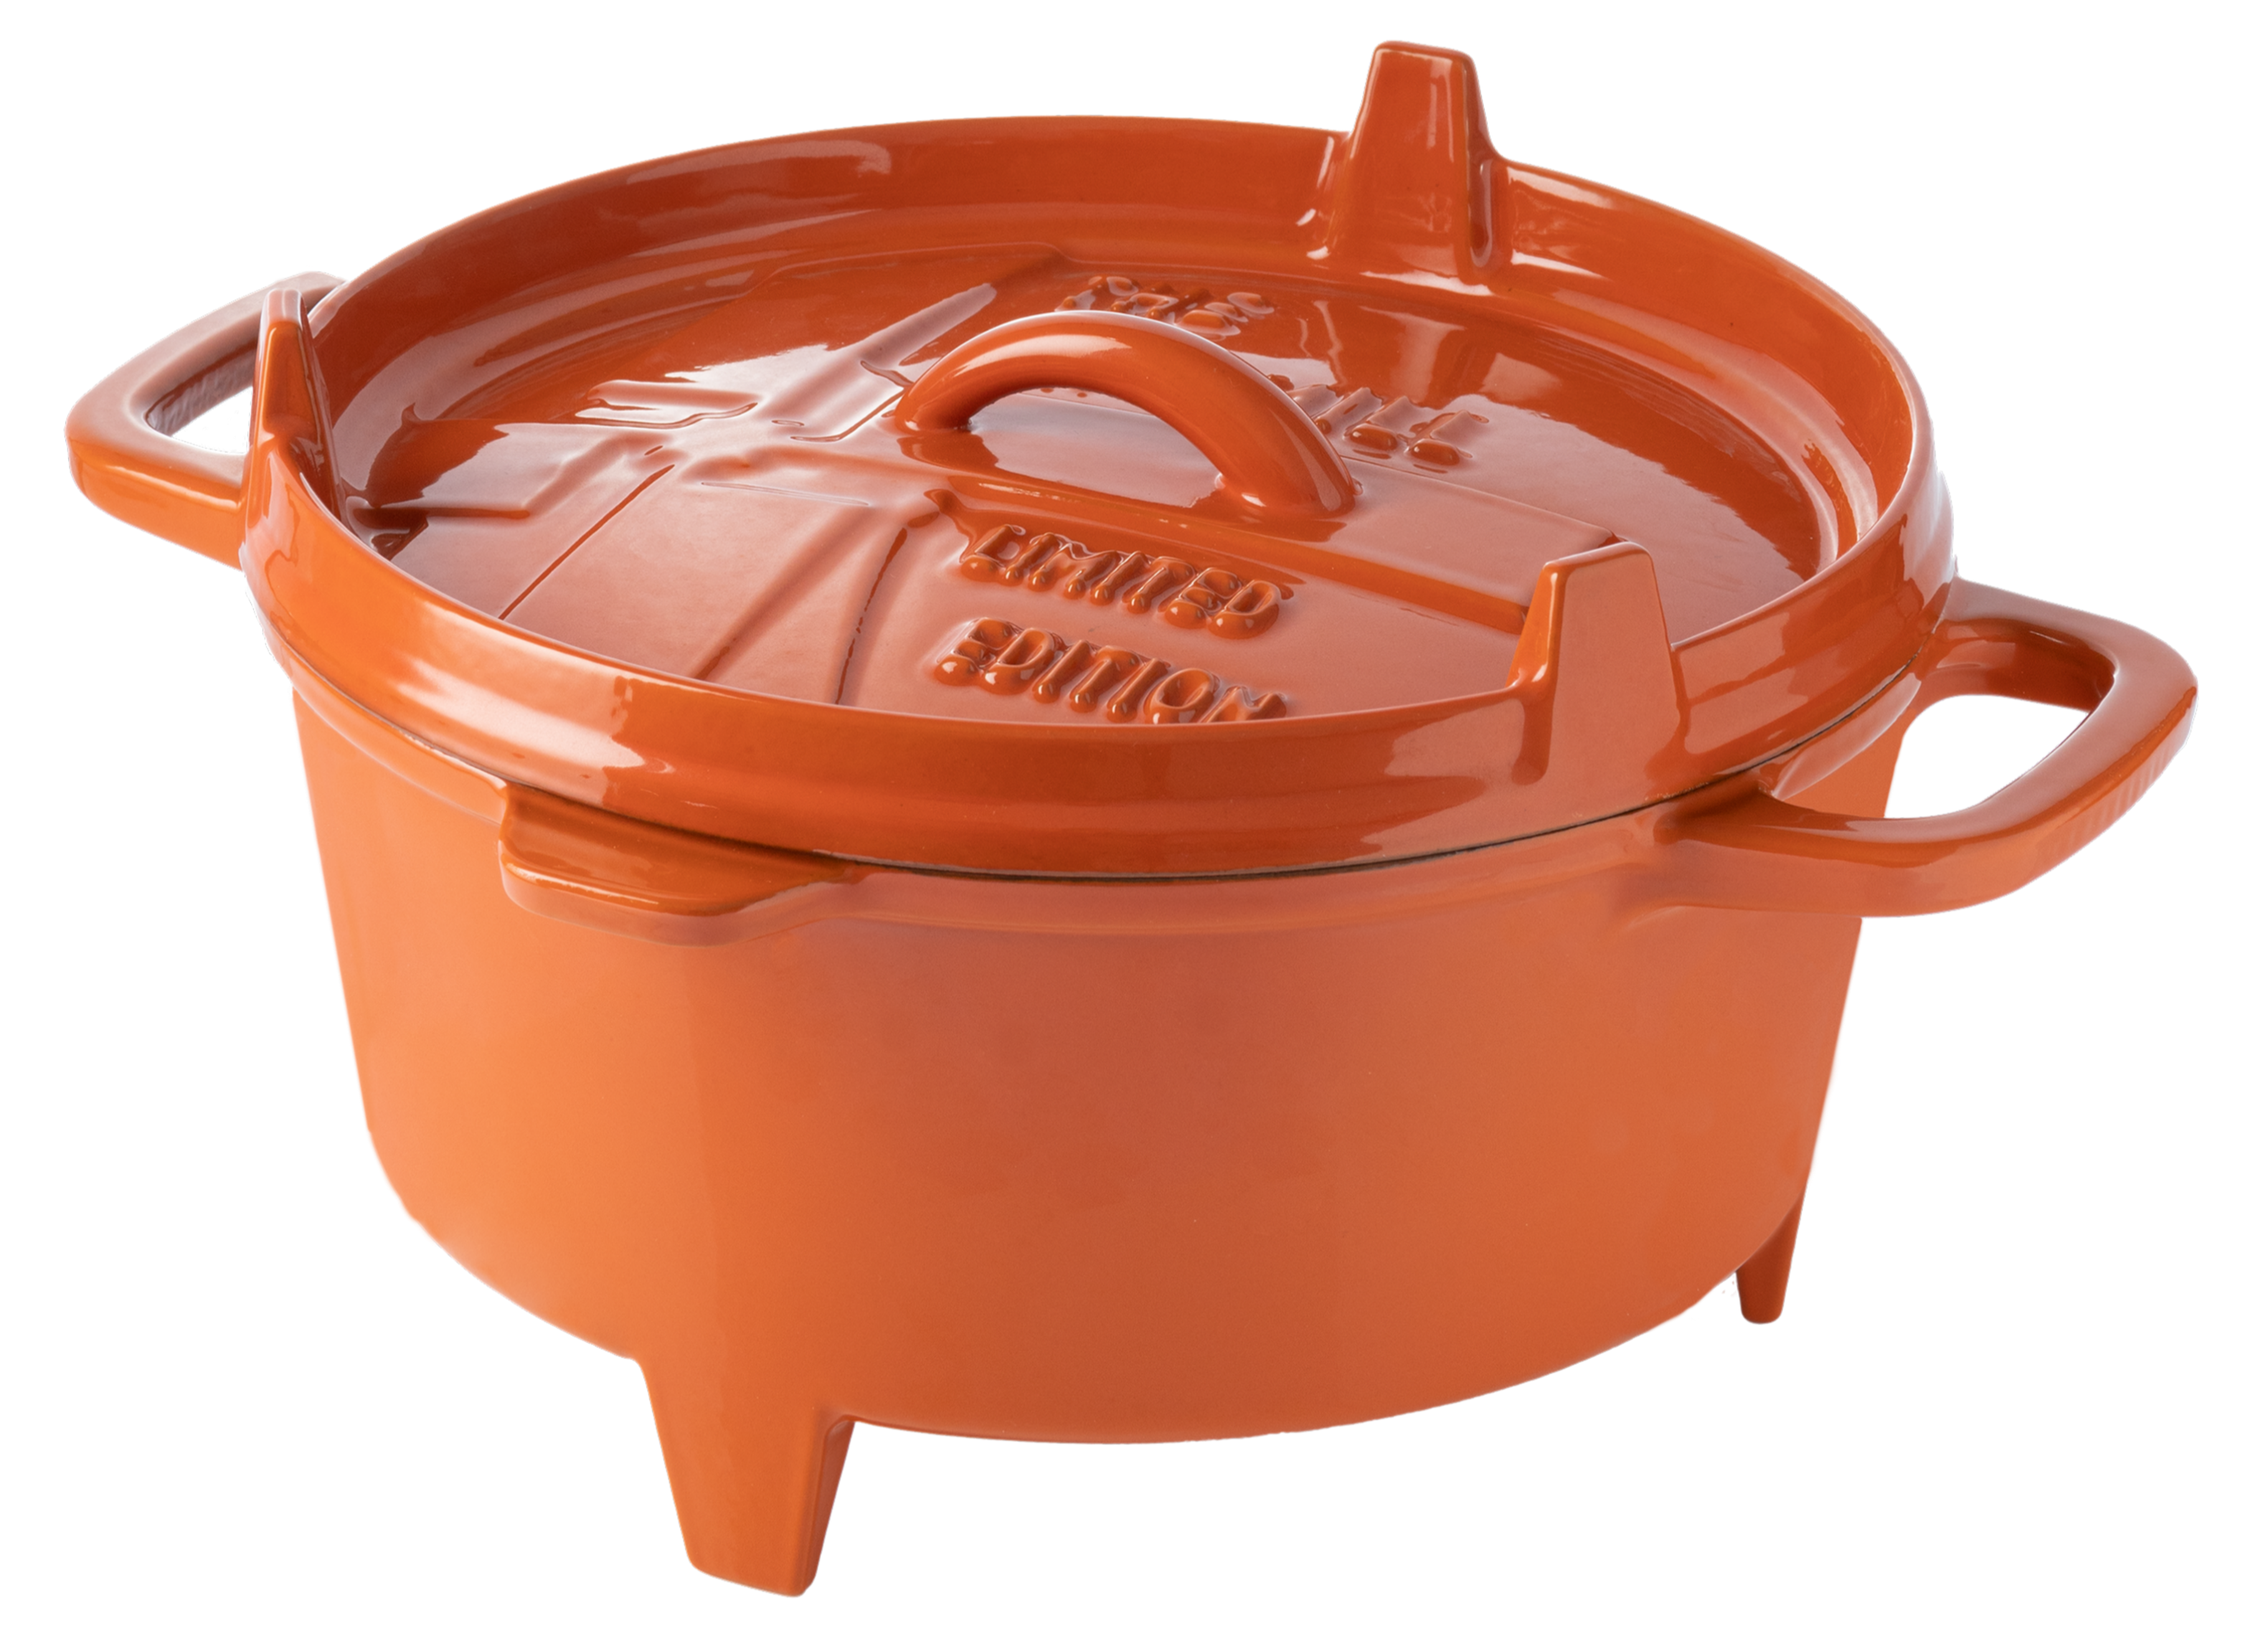 The Windmill Dutch Oven 4.5 Qt Limited Edition Enameled